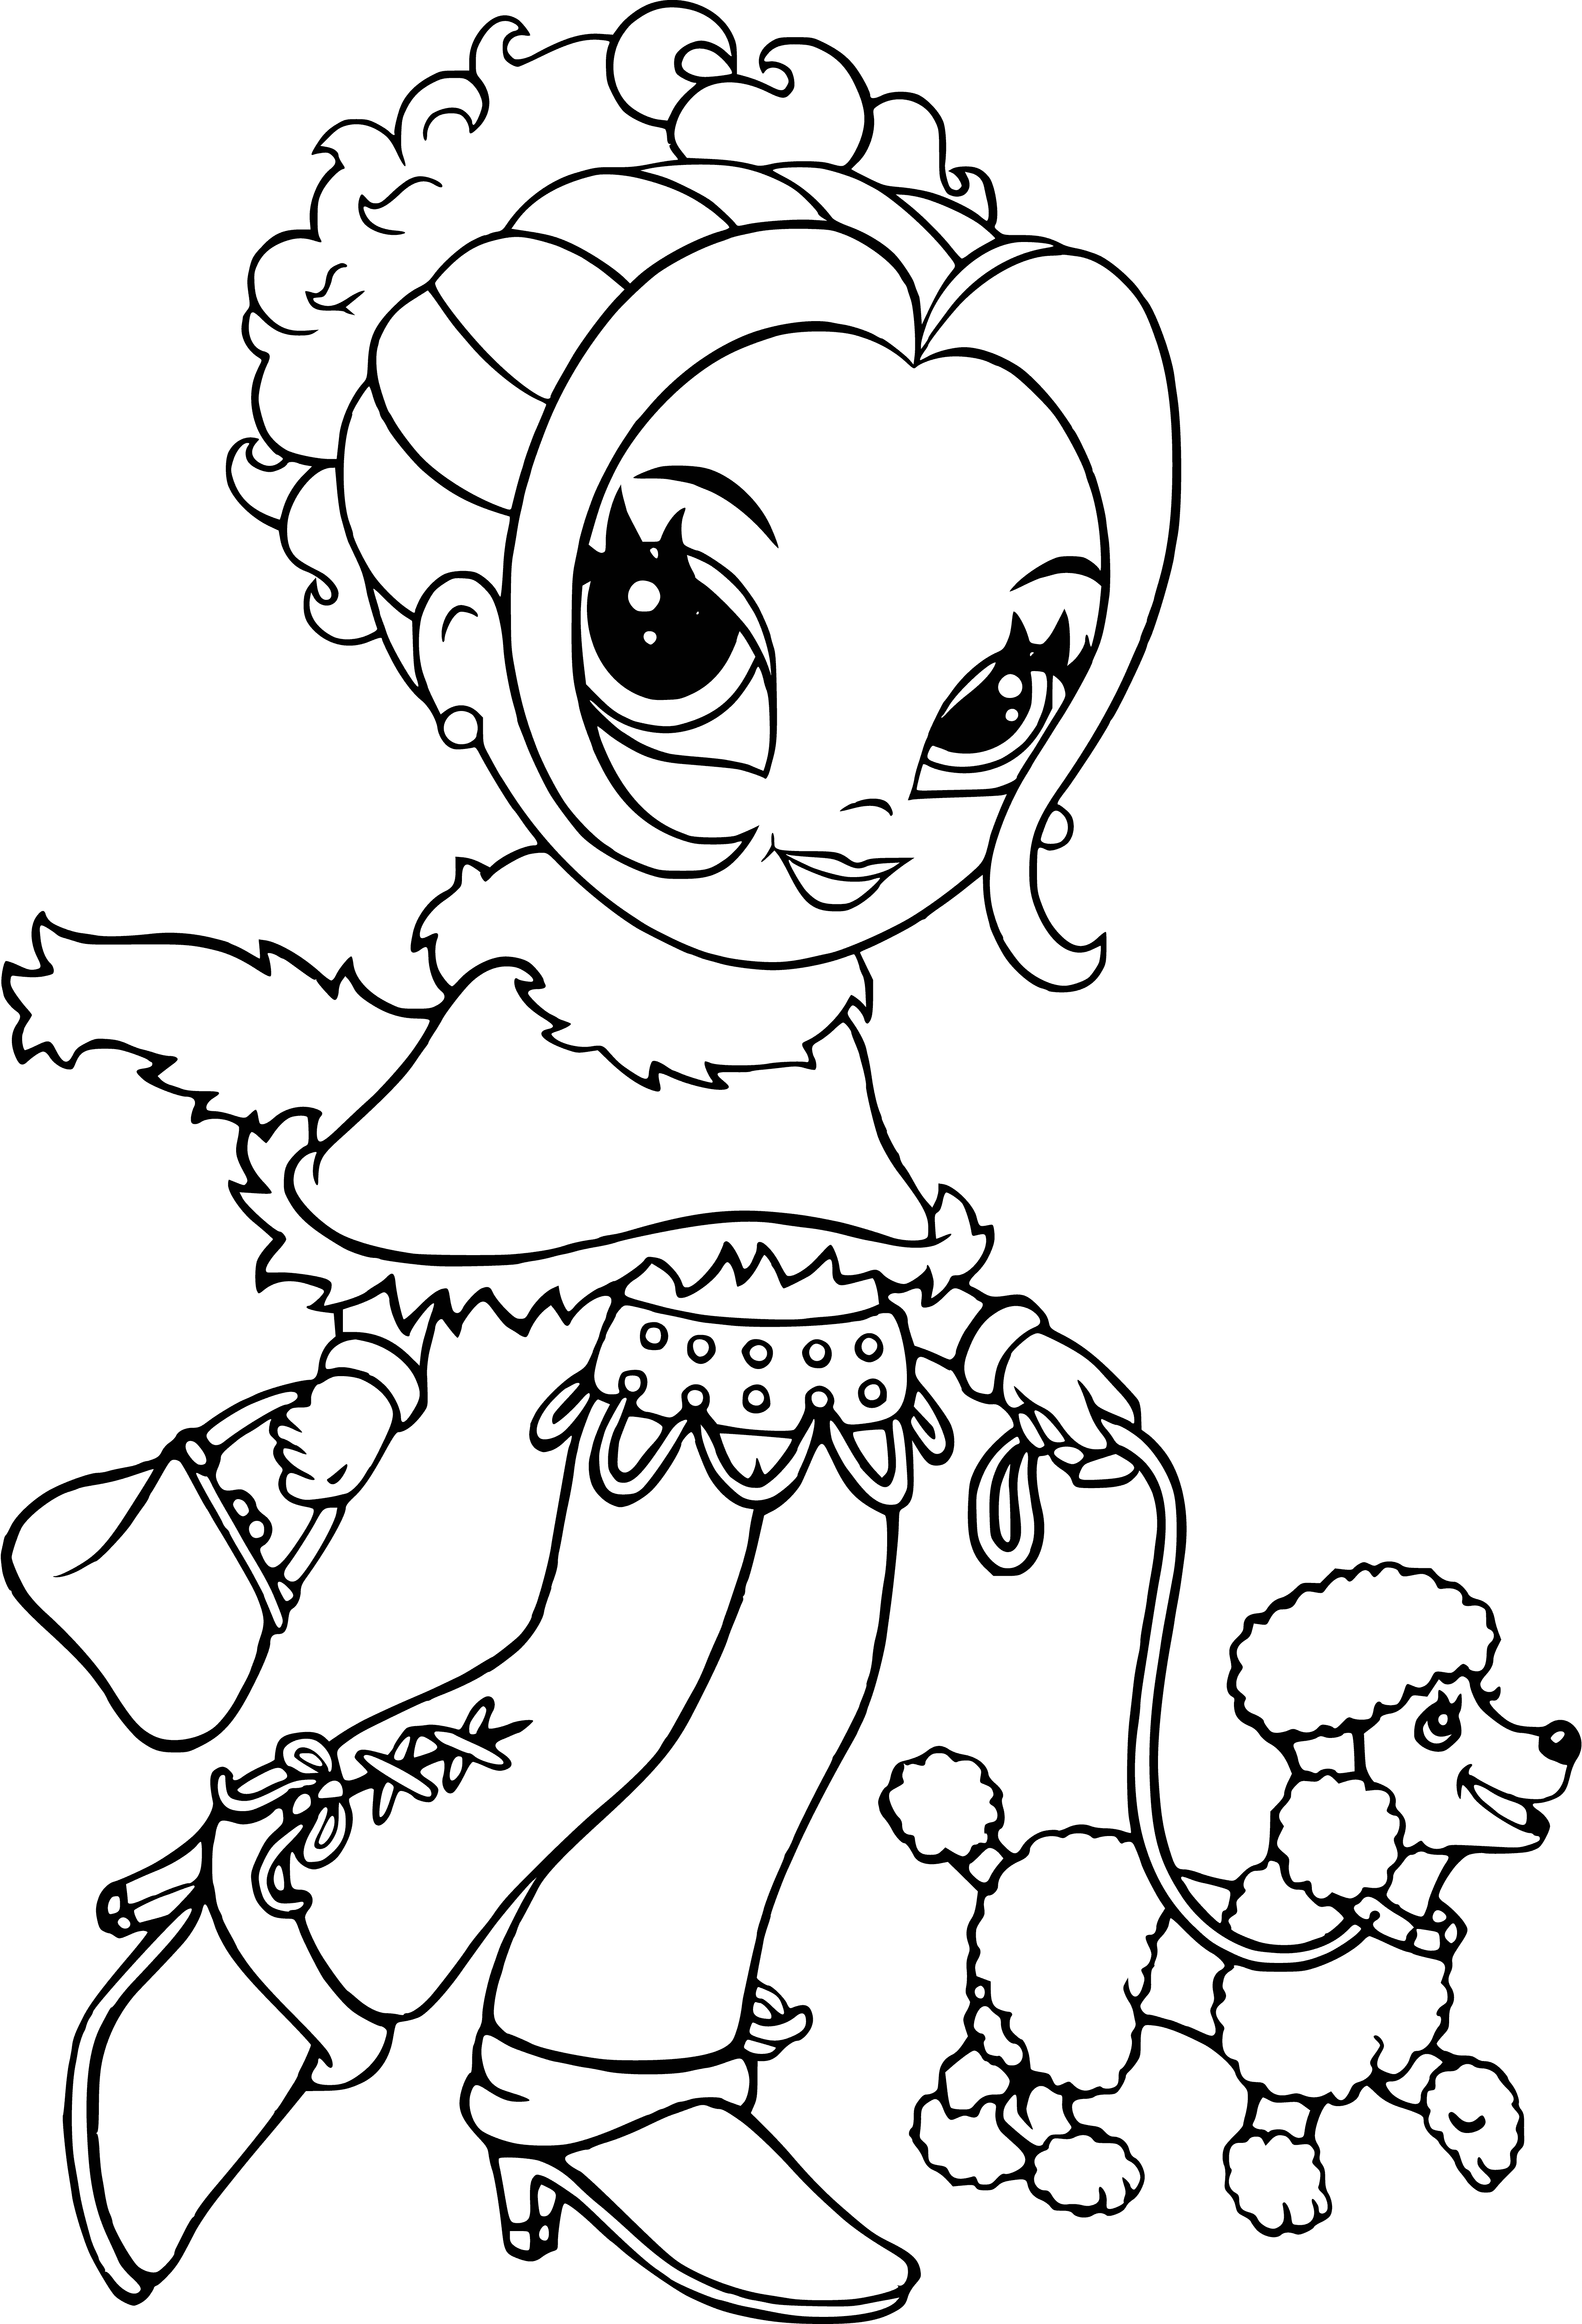 coloring page: Glam girl in a pink dress with long hair, necklace and earrings.